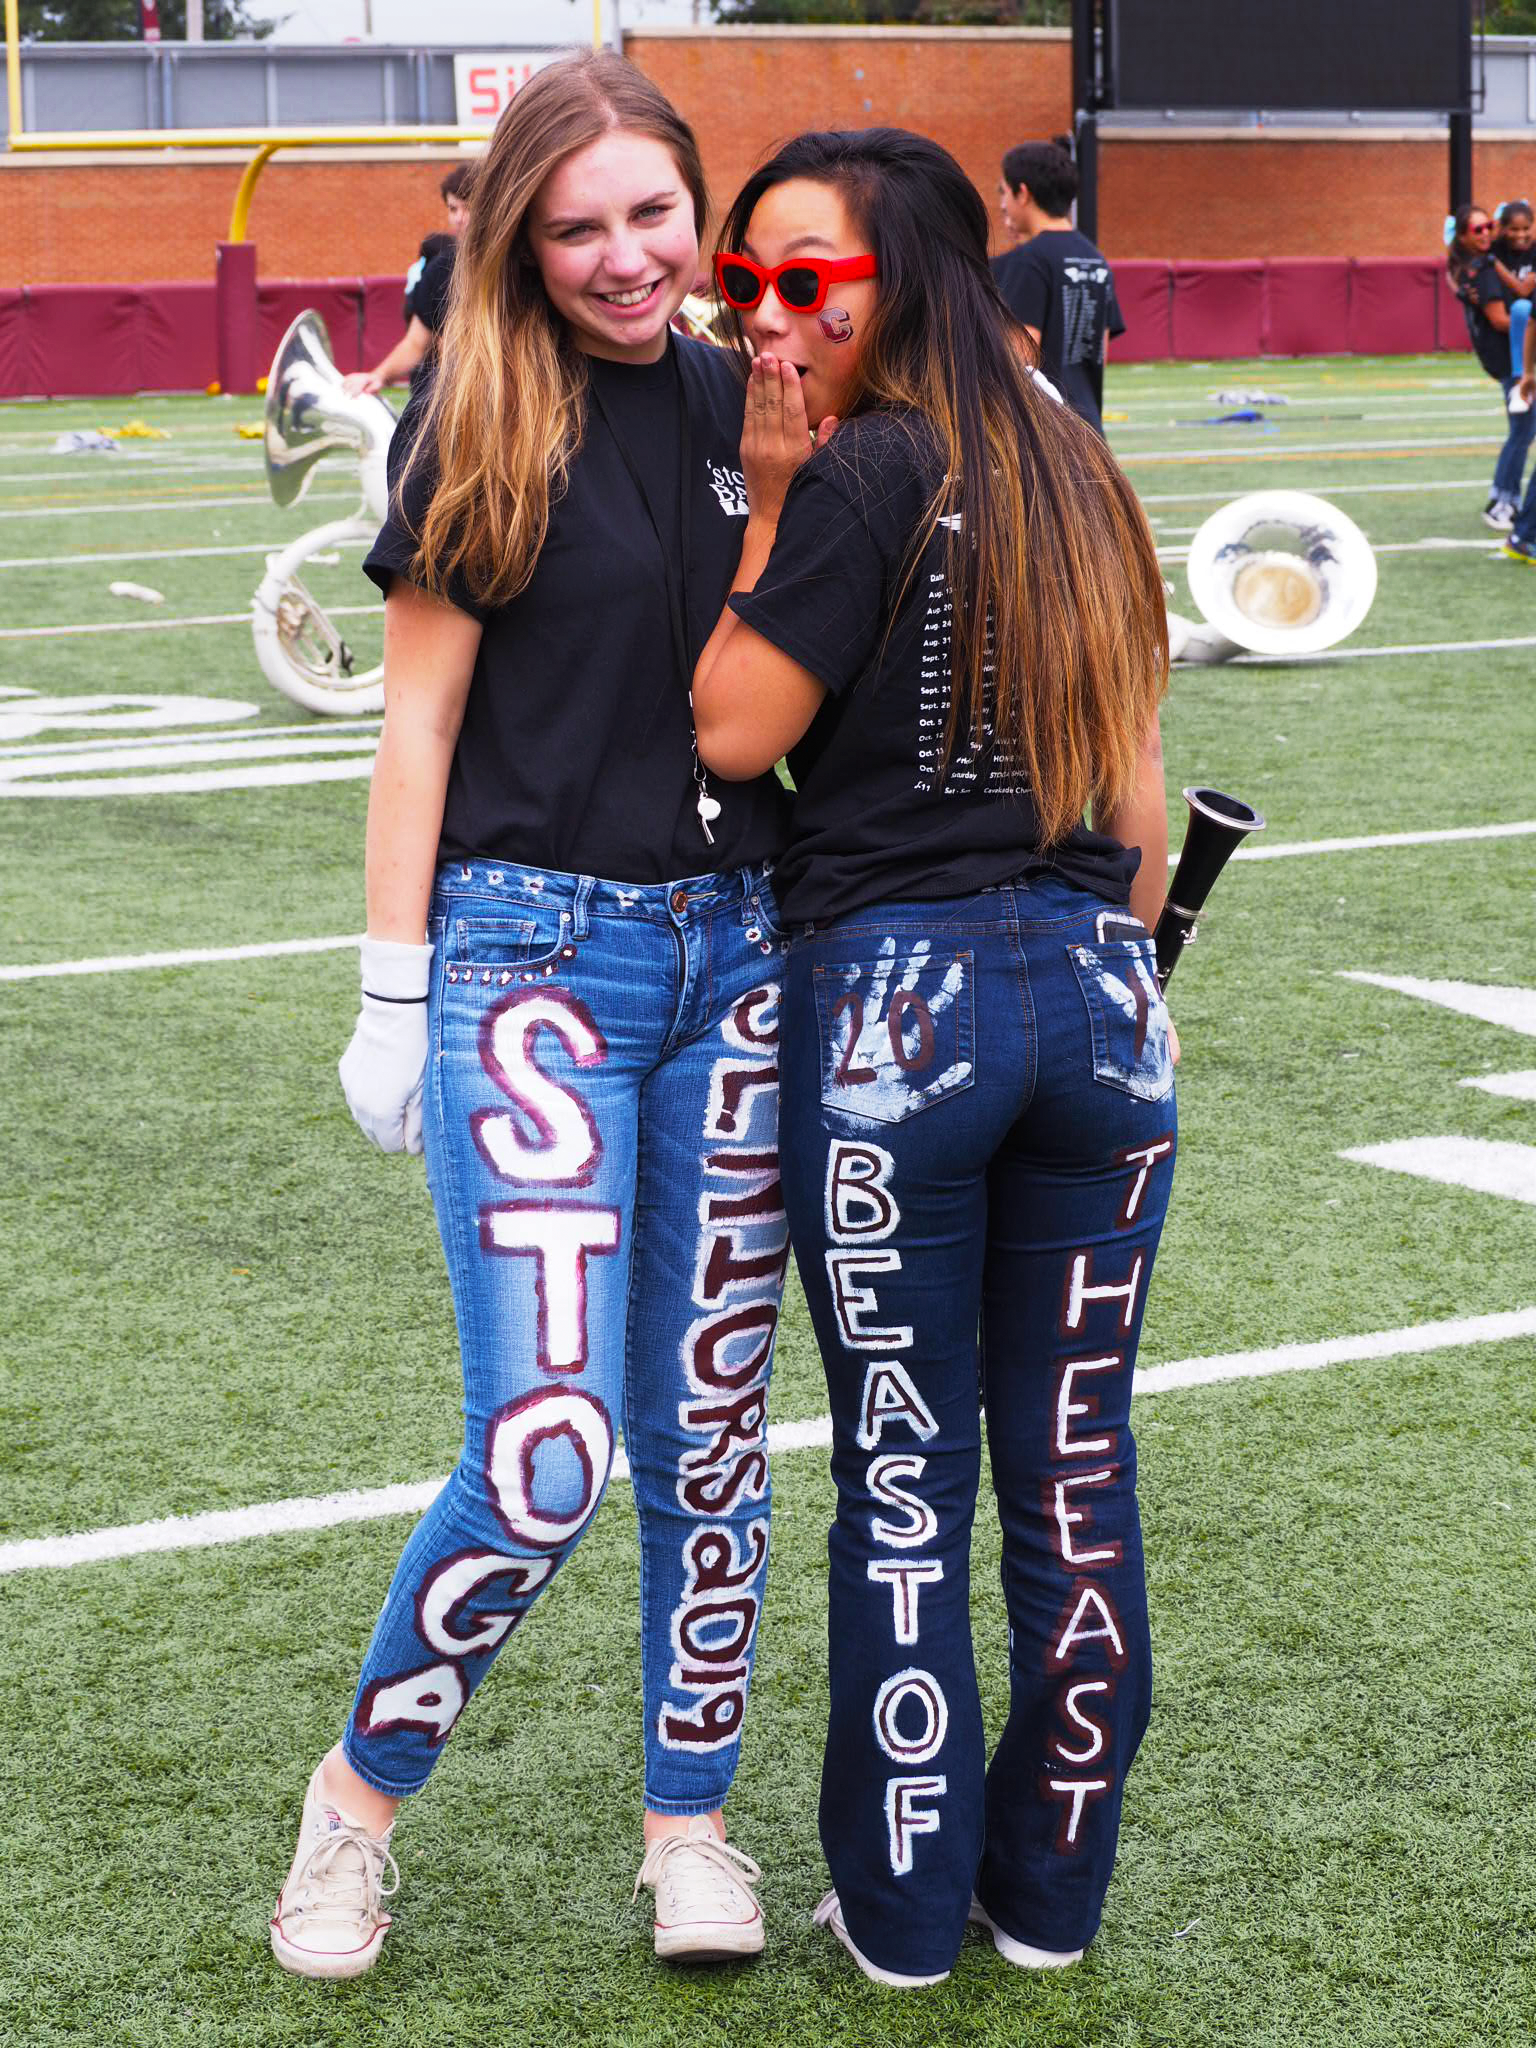 Decorated Jeans For Homecoming - Room Pictures & All About Home Design